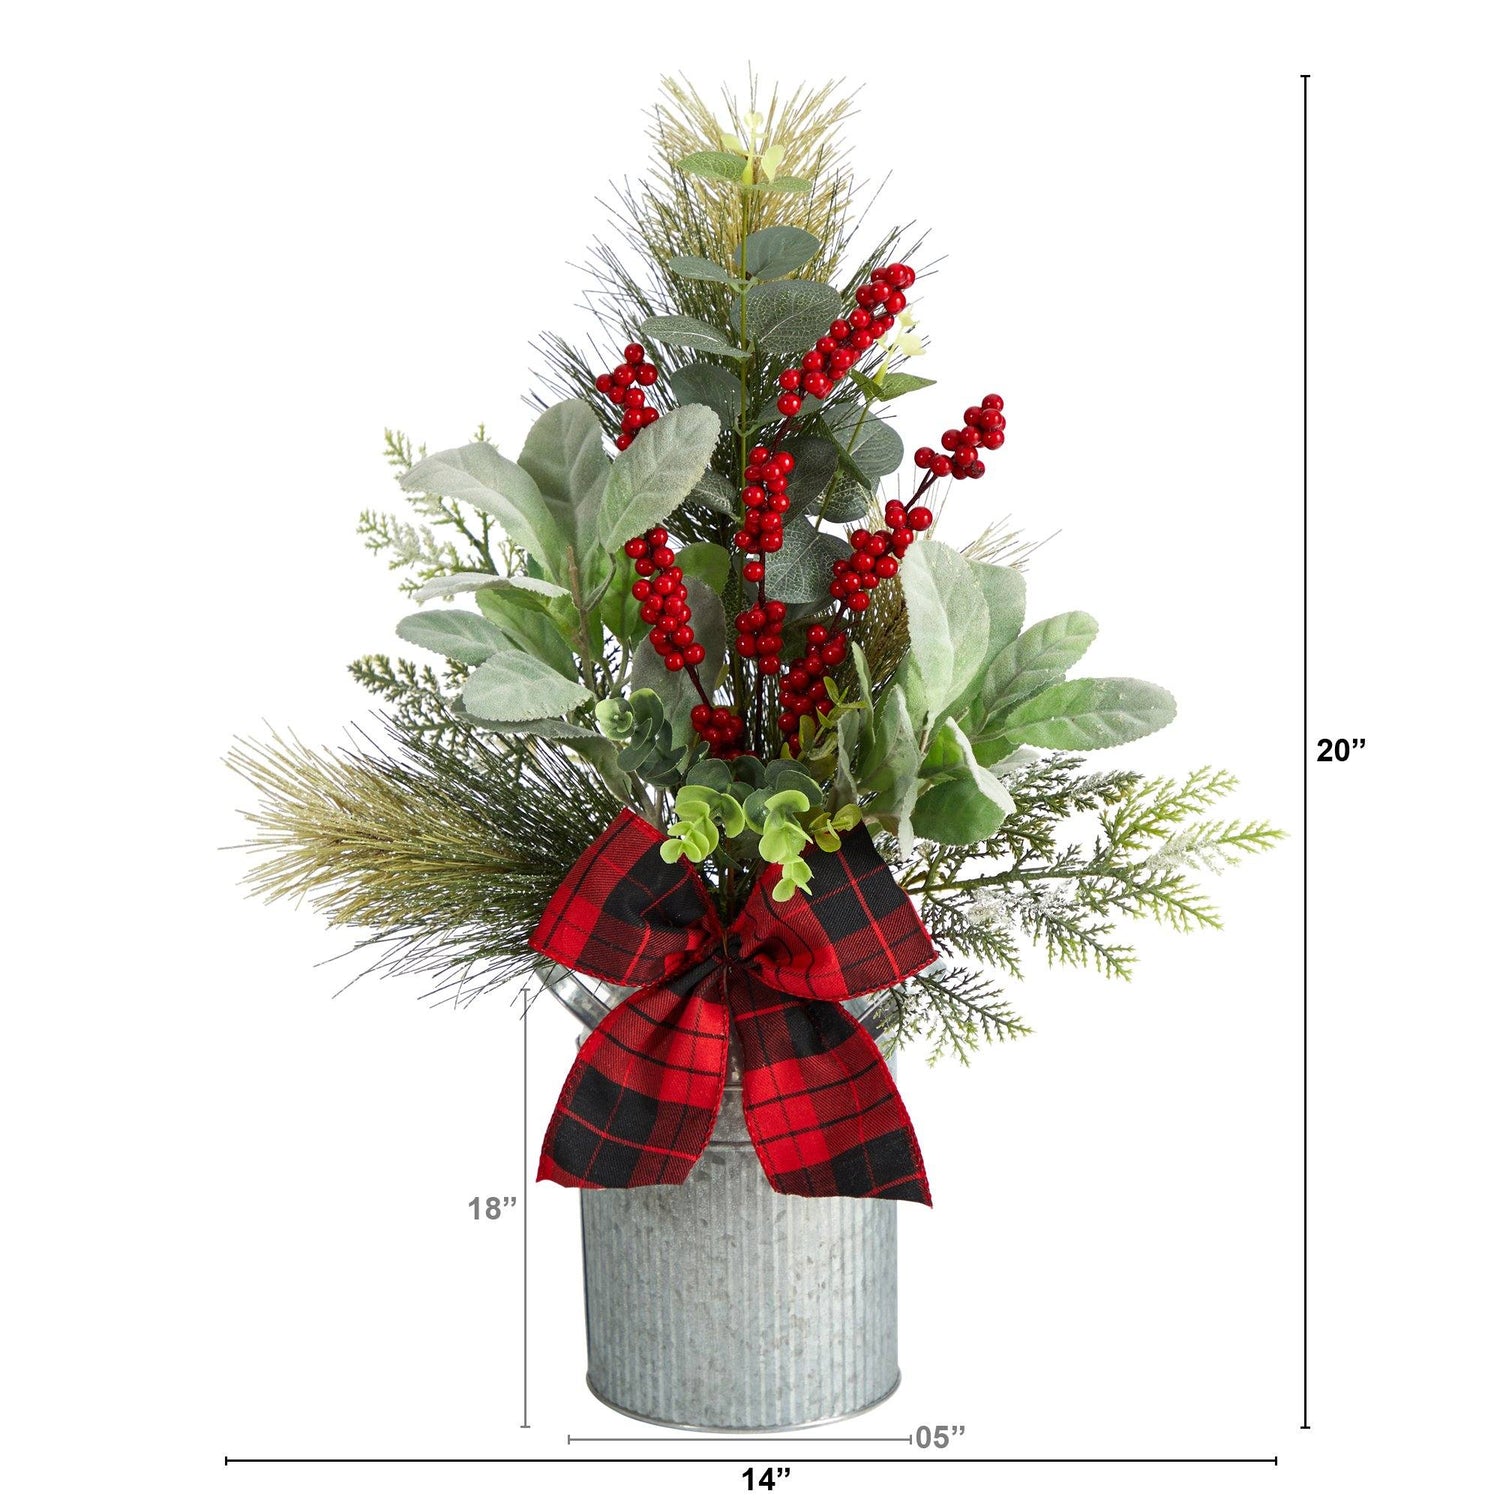 20" Holiday Winter Greenery, Pinecone and Berries with Buffalo Plaid Bow Christmas  Arrangement"